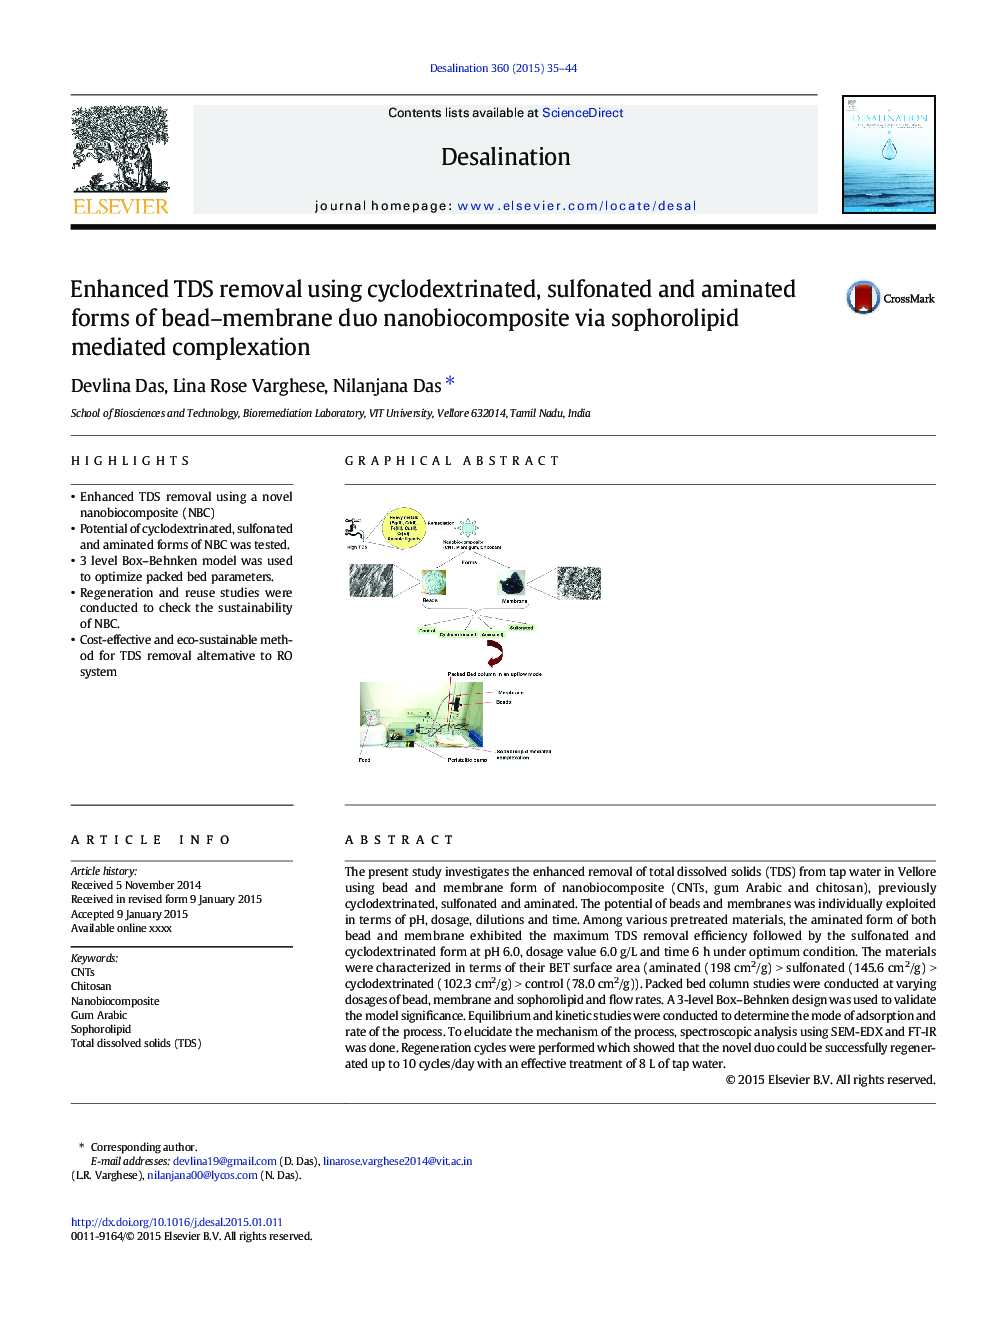 Enhanced TDS removal using cyclodextrinated, sulfonated and aminated forms of bead-membrane duo nanobiocomposite via sophorolipid mediated complexation